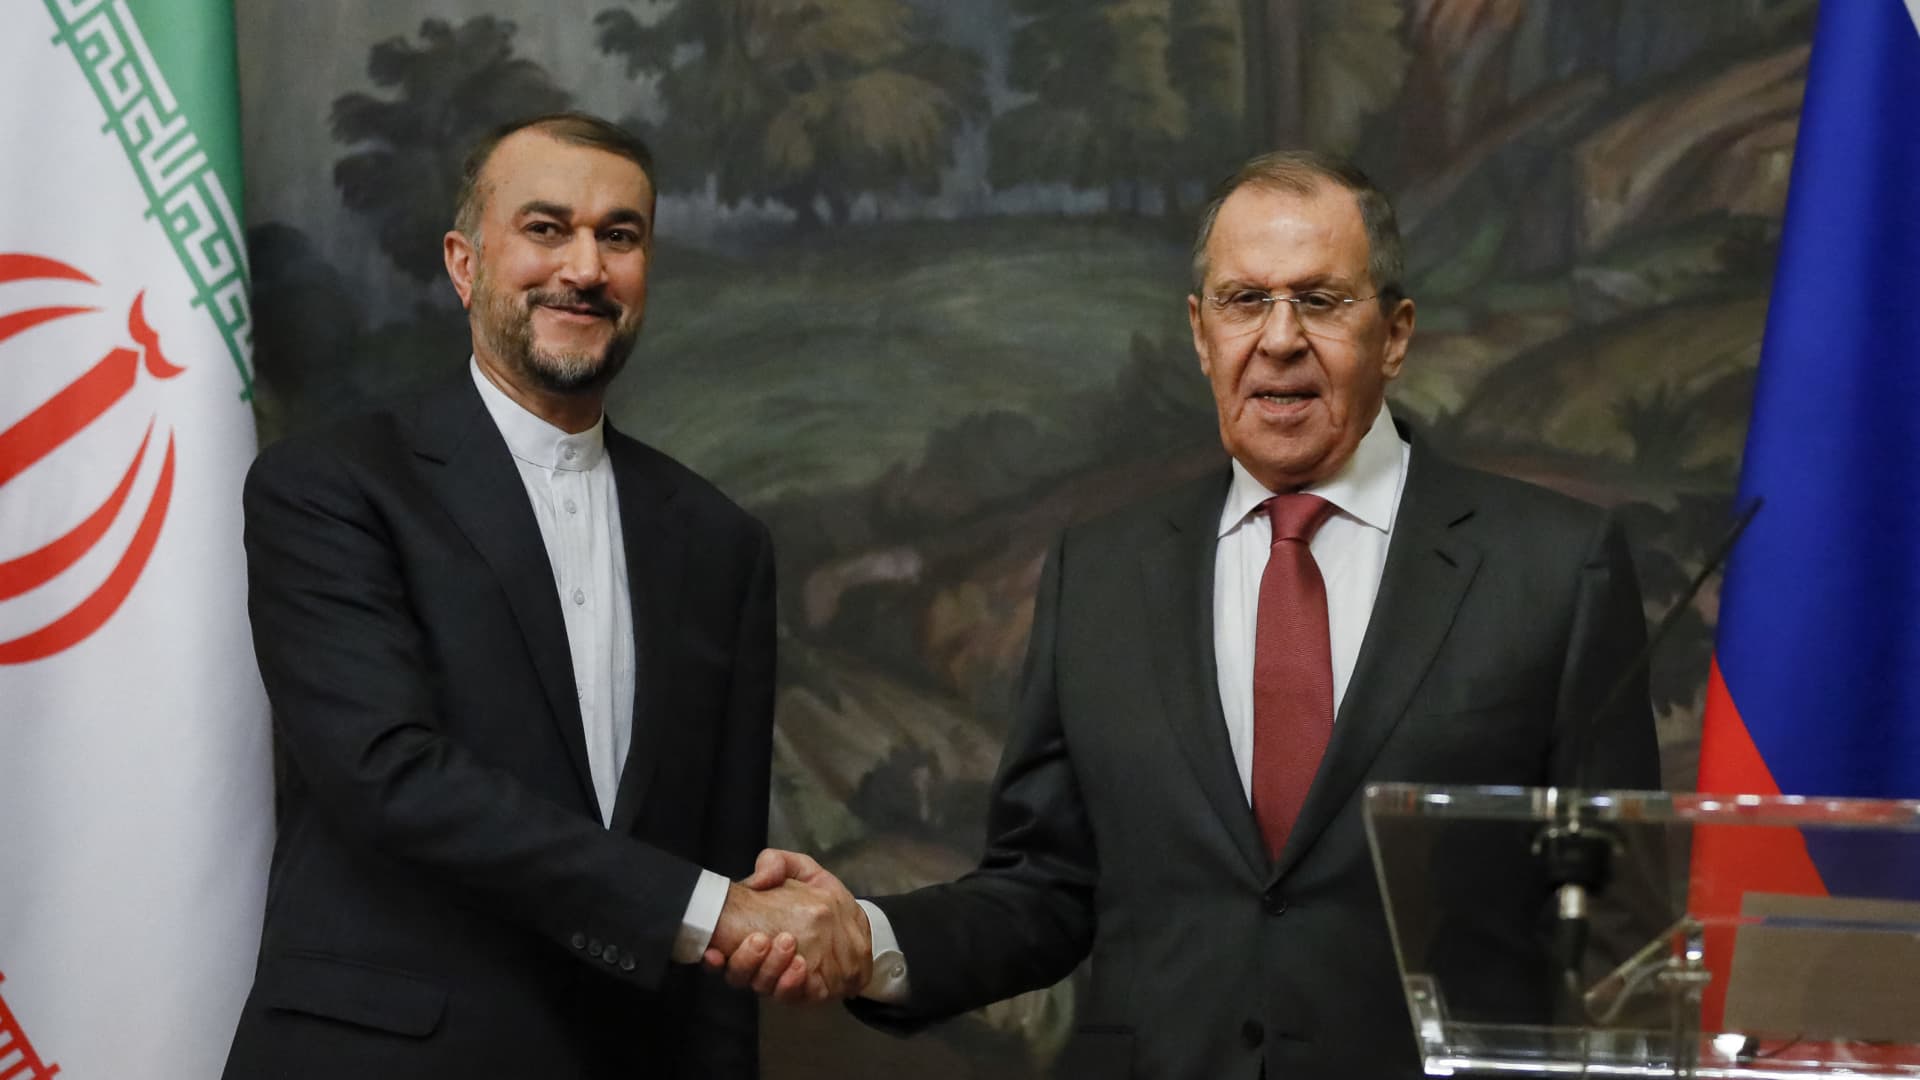 Russian Foreign Minister Sergei Lavrov and his Iranian counterpart Hossein Amir-Abdoulahian hold a joint press conference following their talks in Moscow on March 29, 2023.